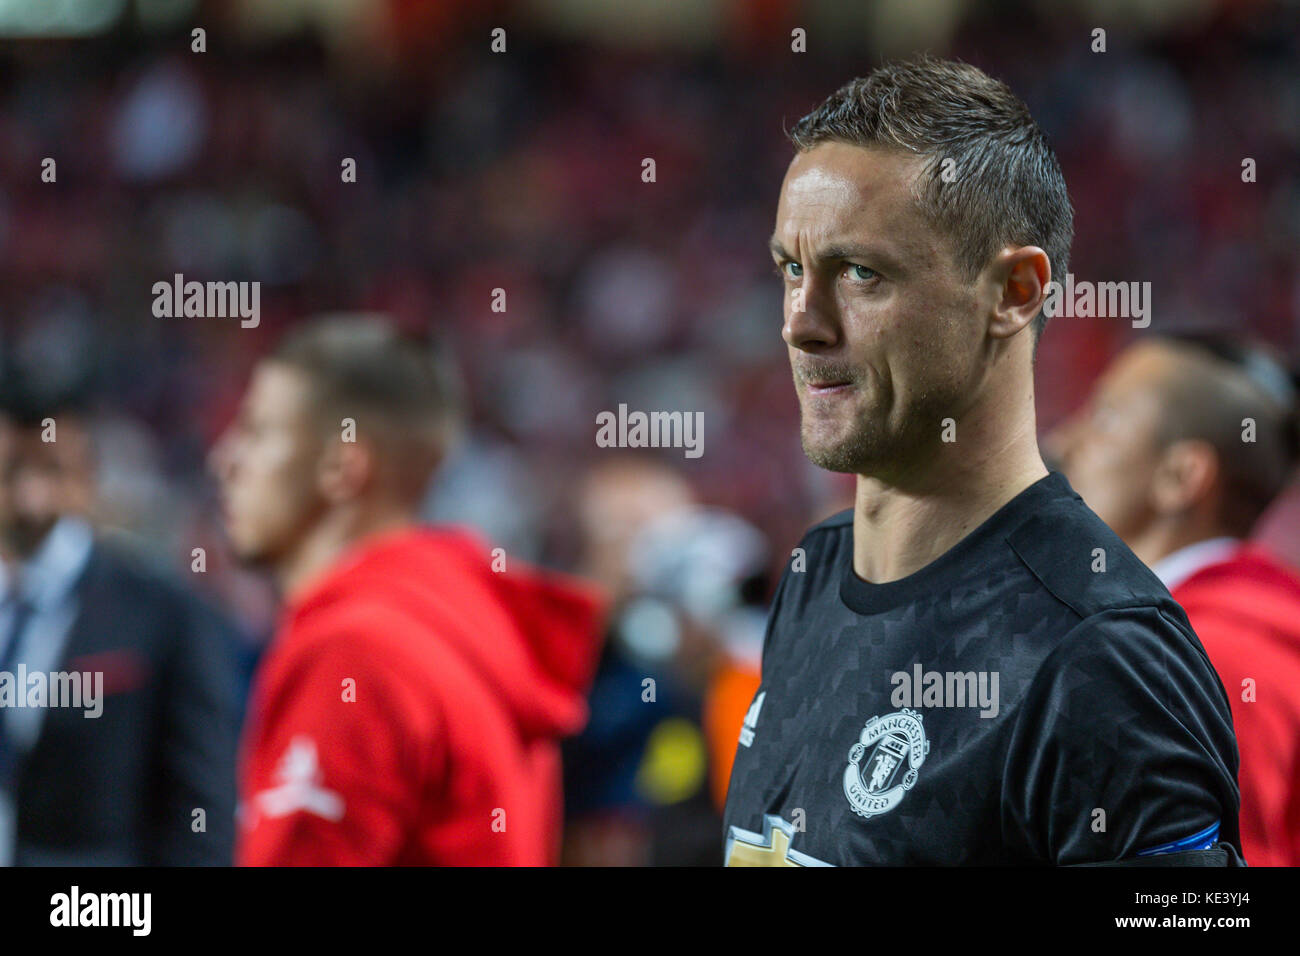 Lisbon, Portugal. 18th Oct, 2017. October 18, 2017. Lisbon, Portugal. Manchester UnitedÕs midfielder from Serbia Nemanja Matic (31) during the game of the 3rd round of the UEFA Champions League Group A, SL Benfica v Manchester United FC Credit: Alexandre de Sousa/Alamy Live News Stock Photo